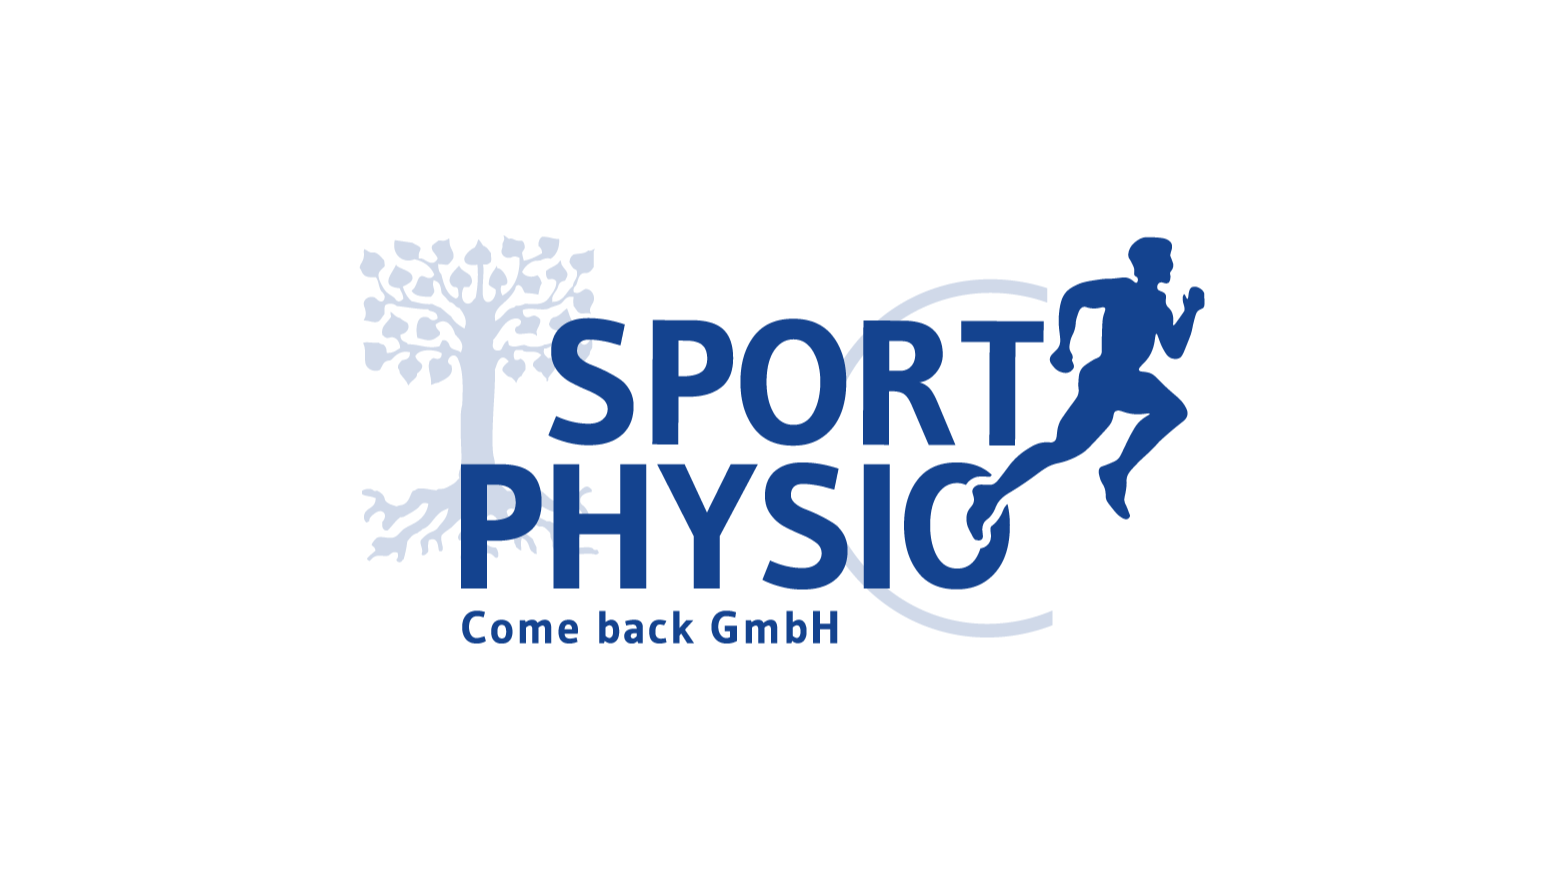 Sportphysio Come back GmbH, Nordring 43 in Gelsenkirchen